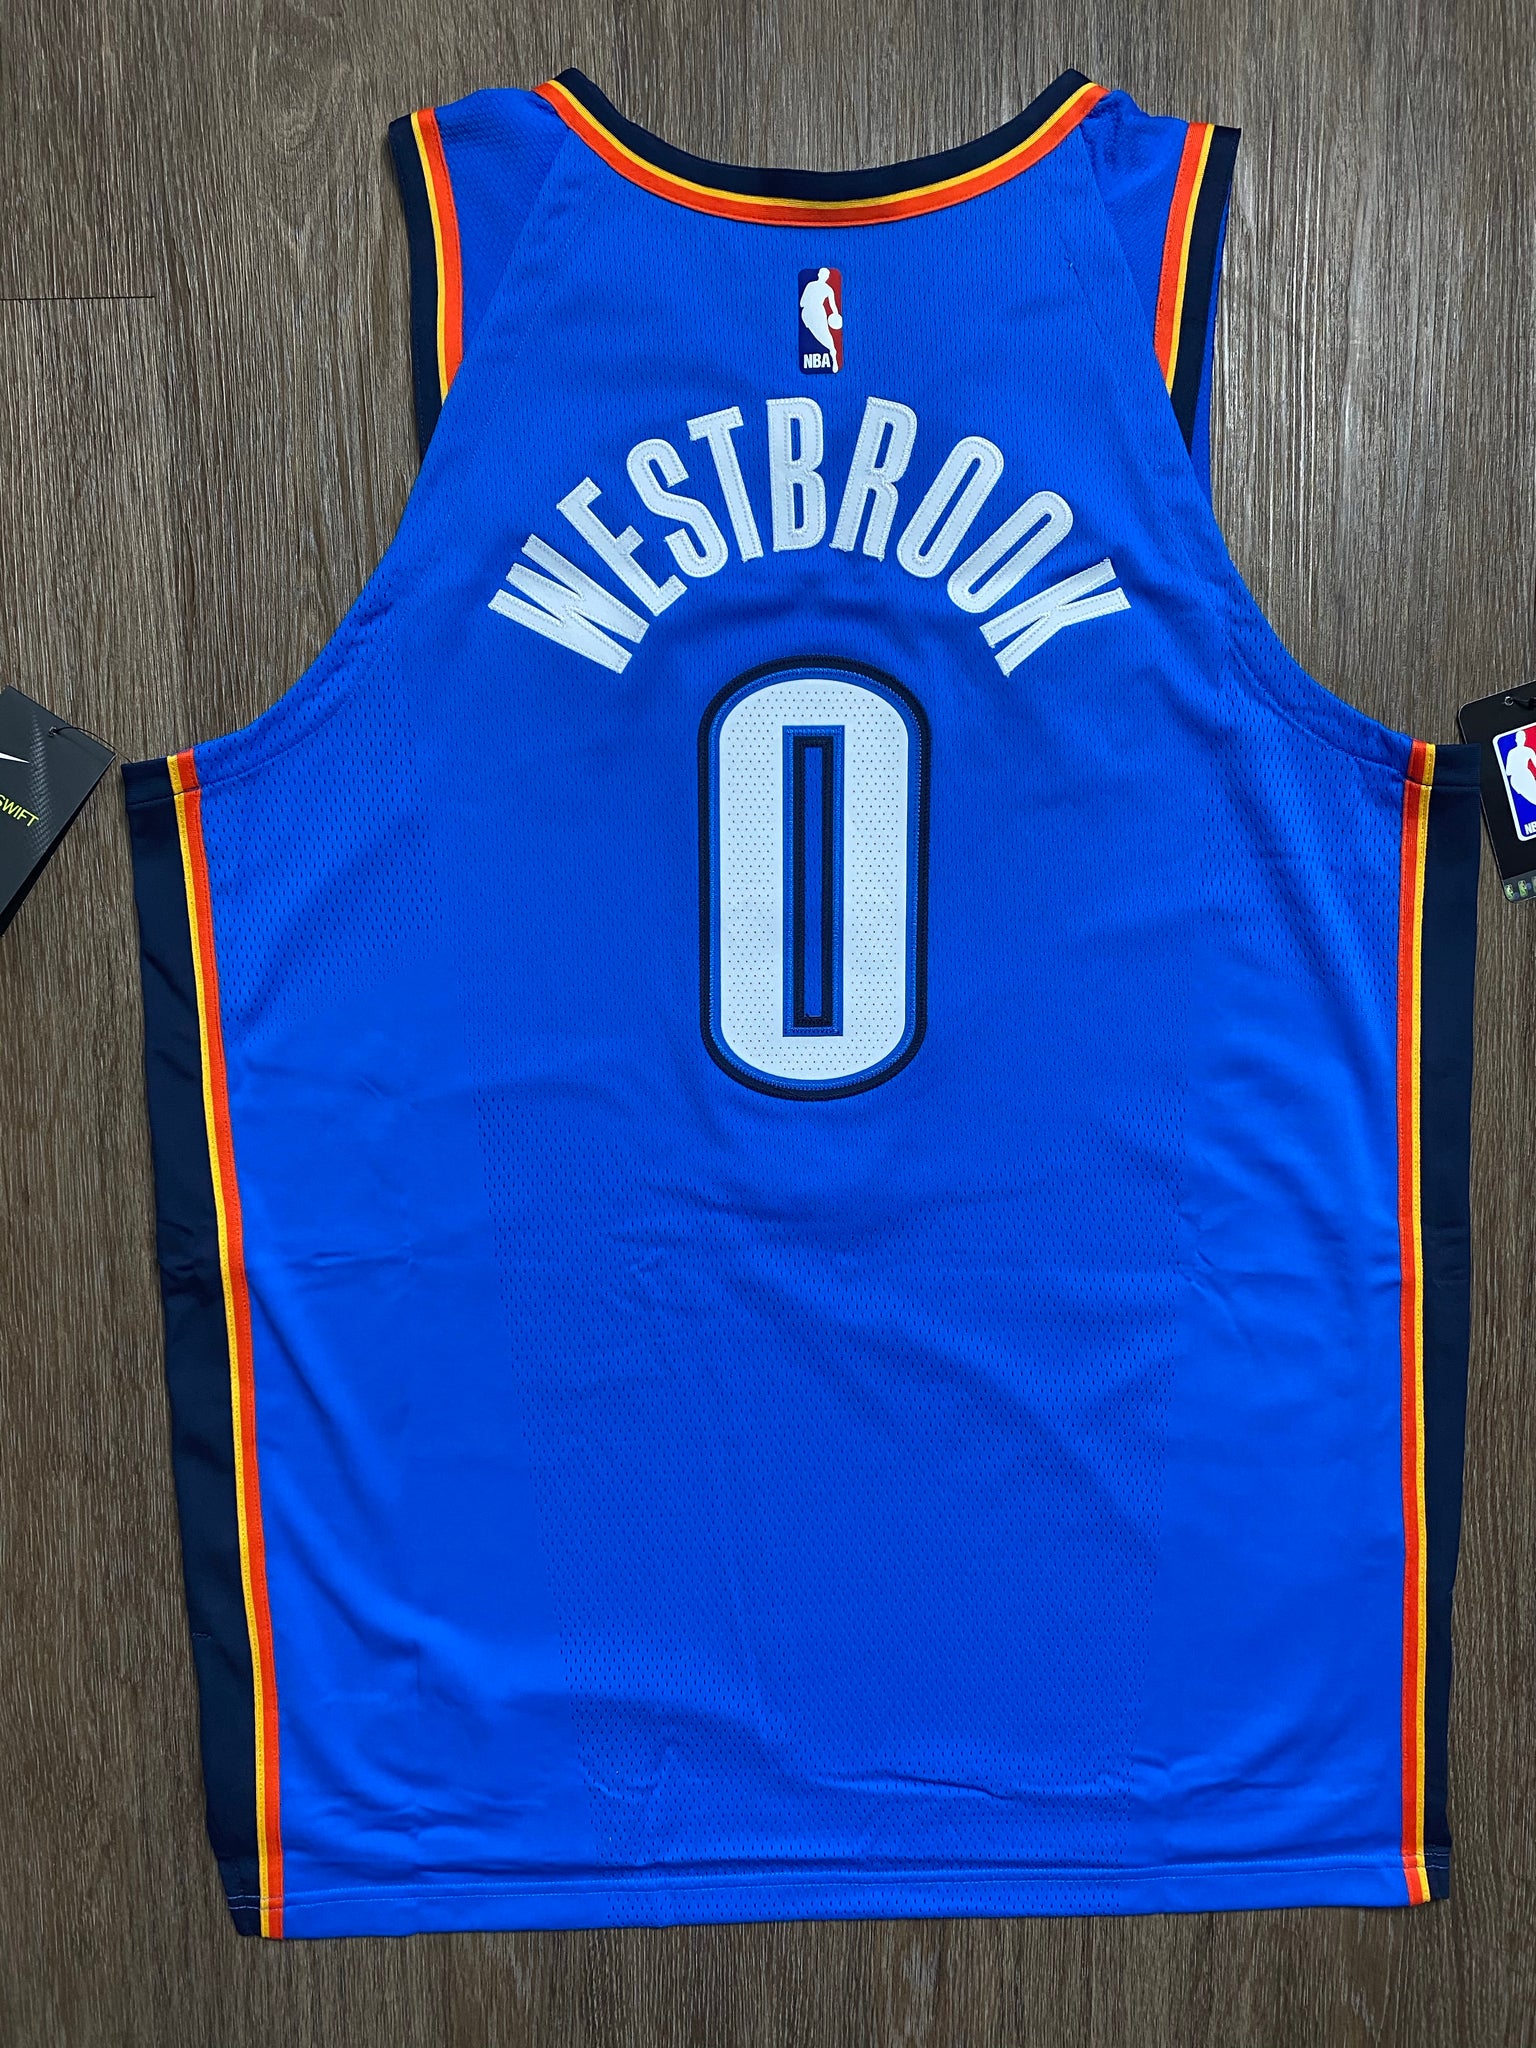 Oklahoma City Russel Westbrook 0 Home Jersey